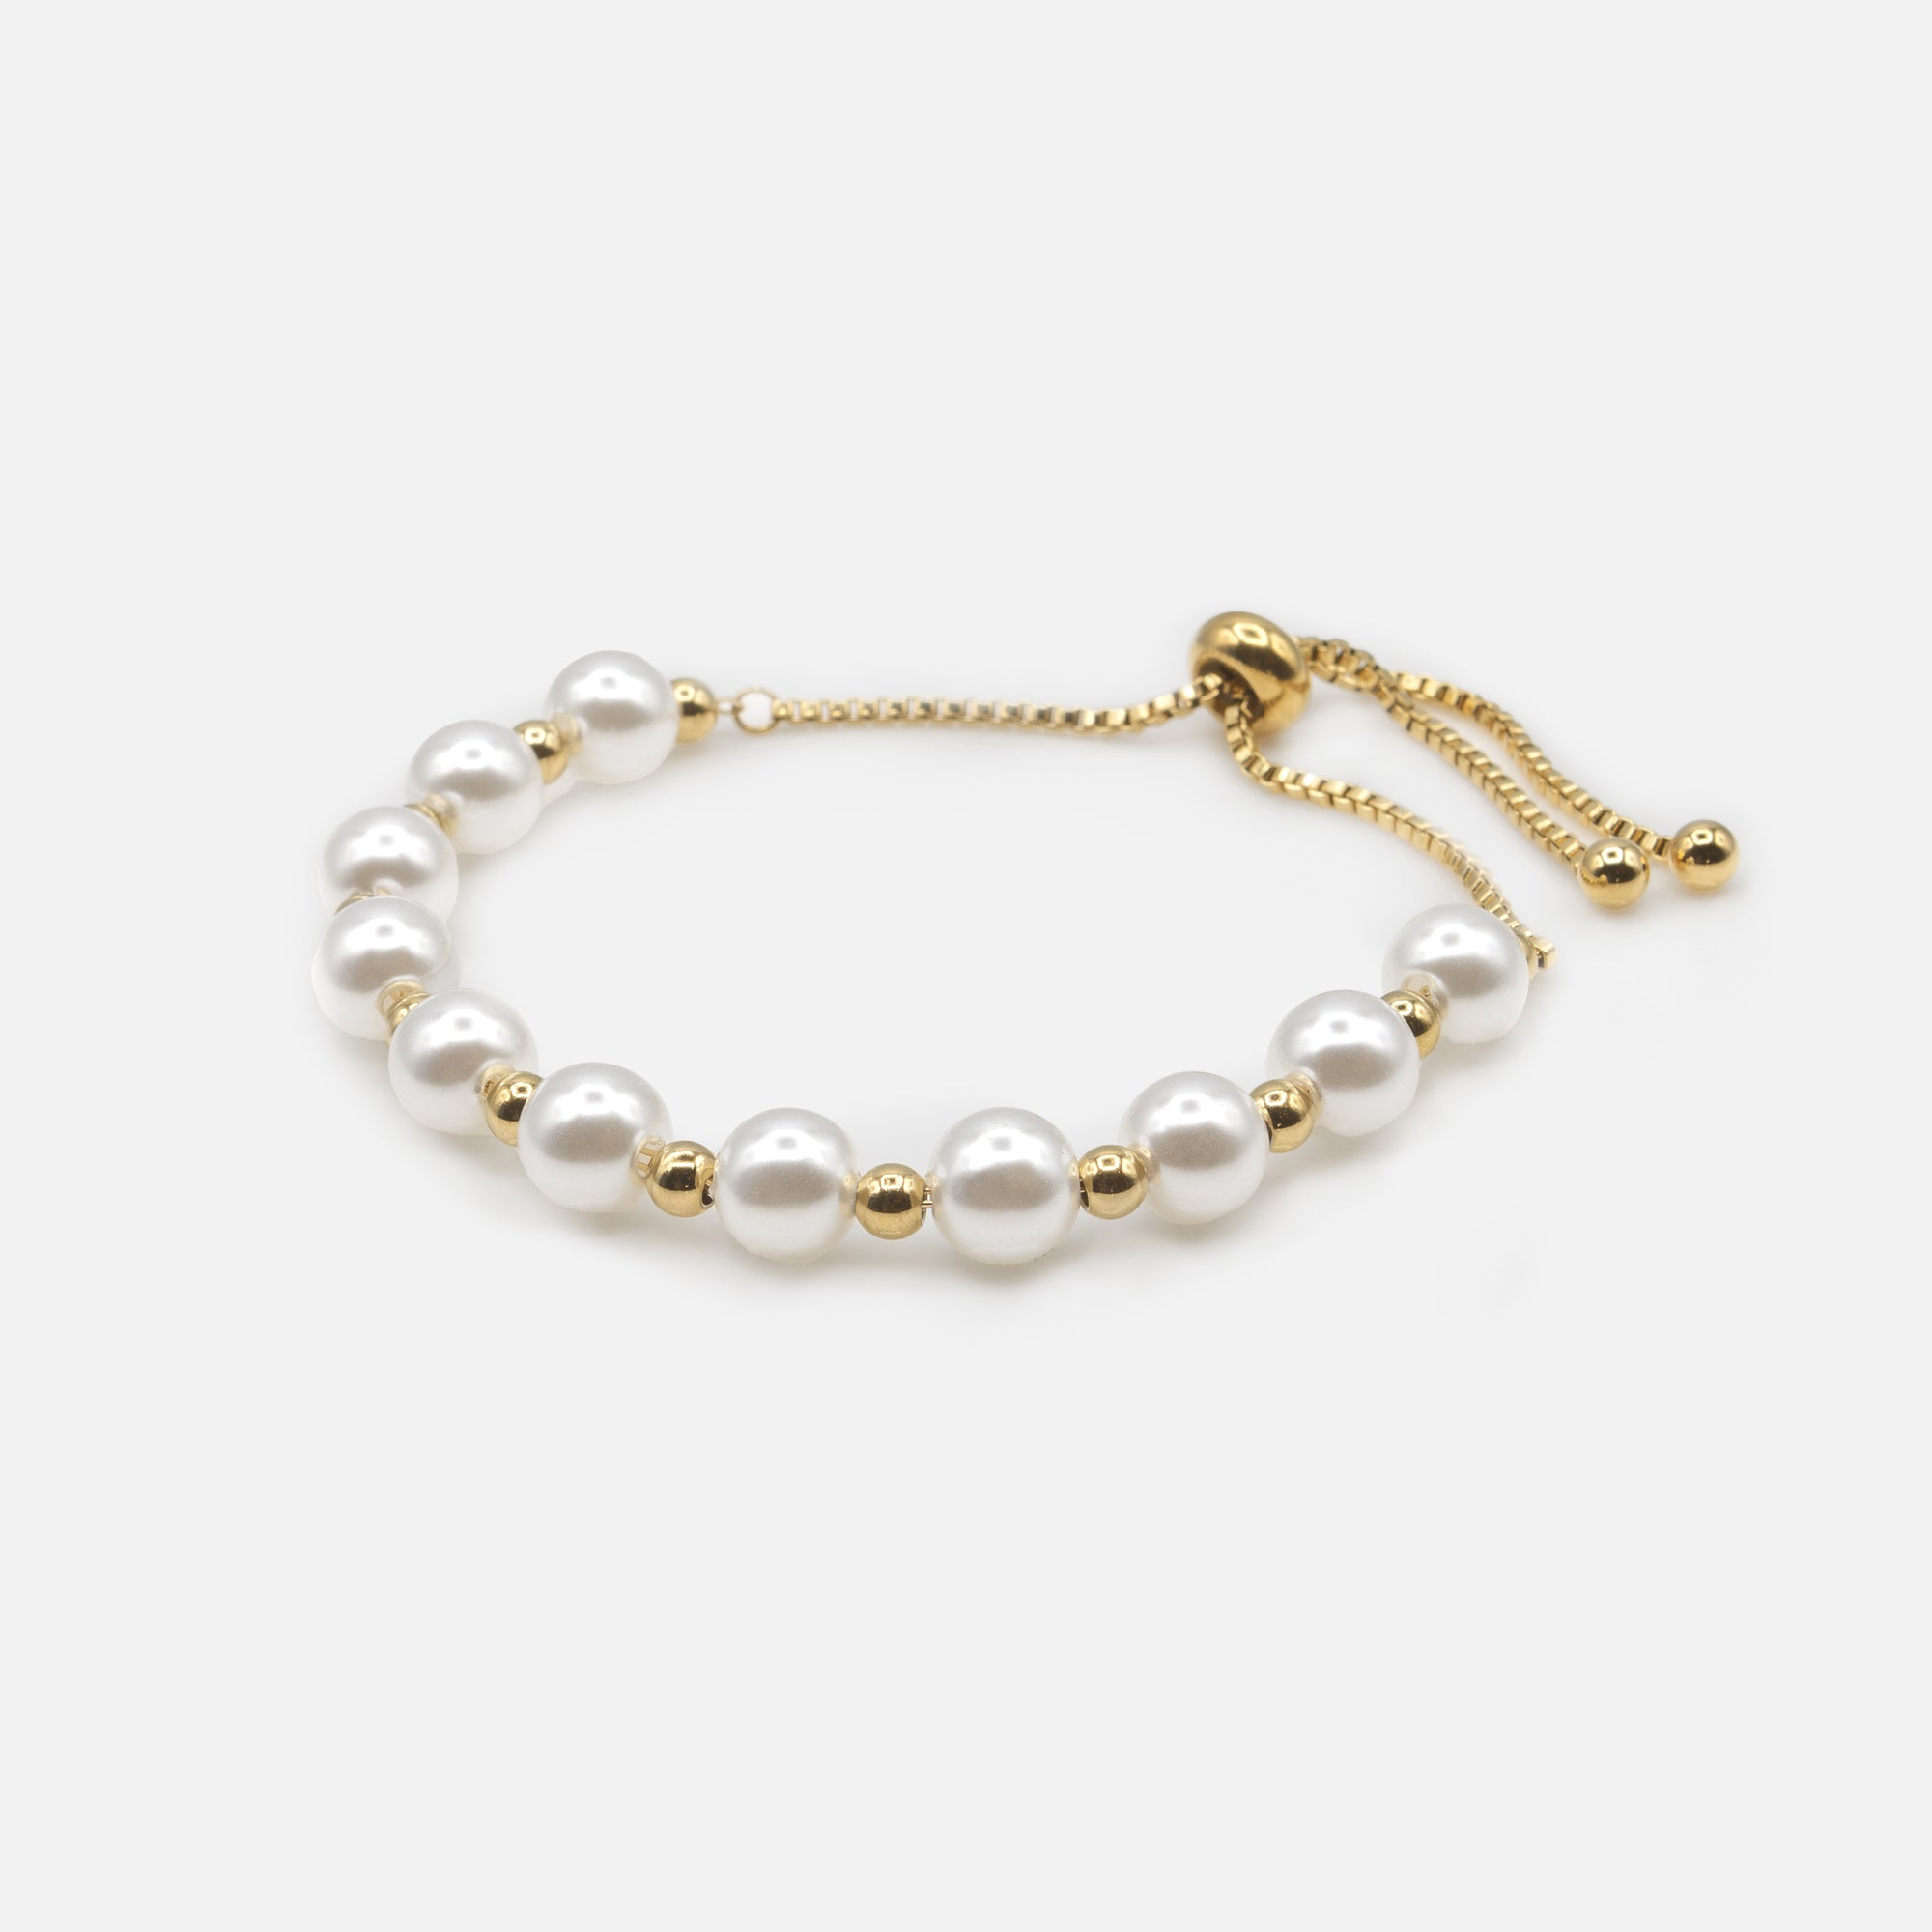 Stainless steel gold bead and bead bracelet